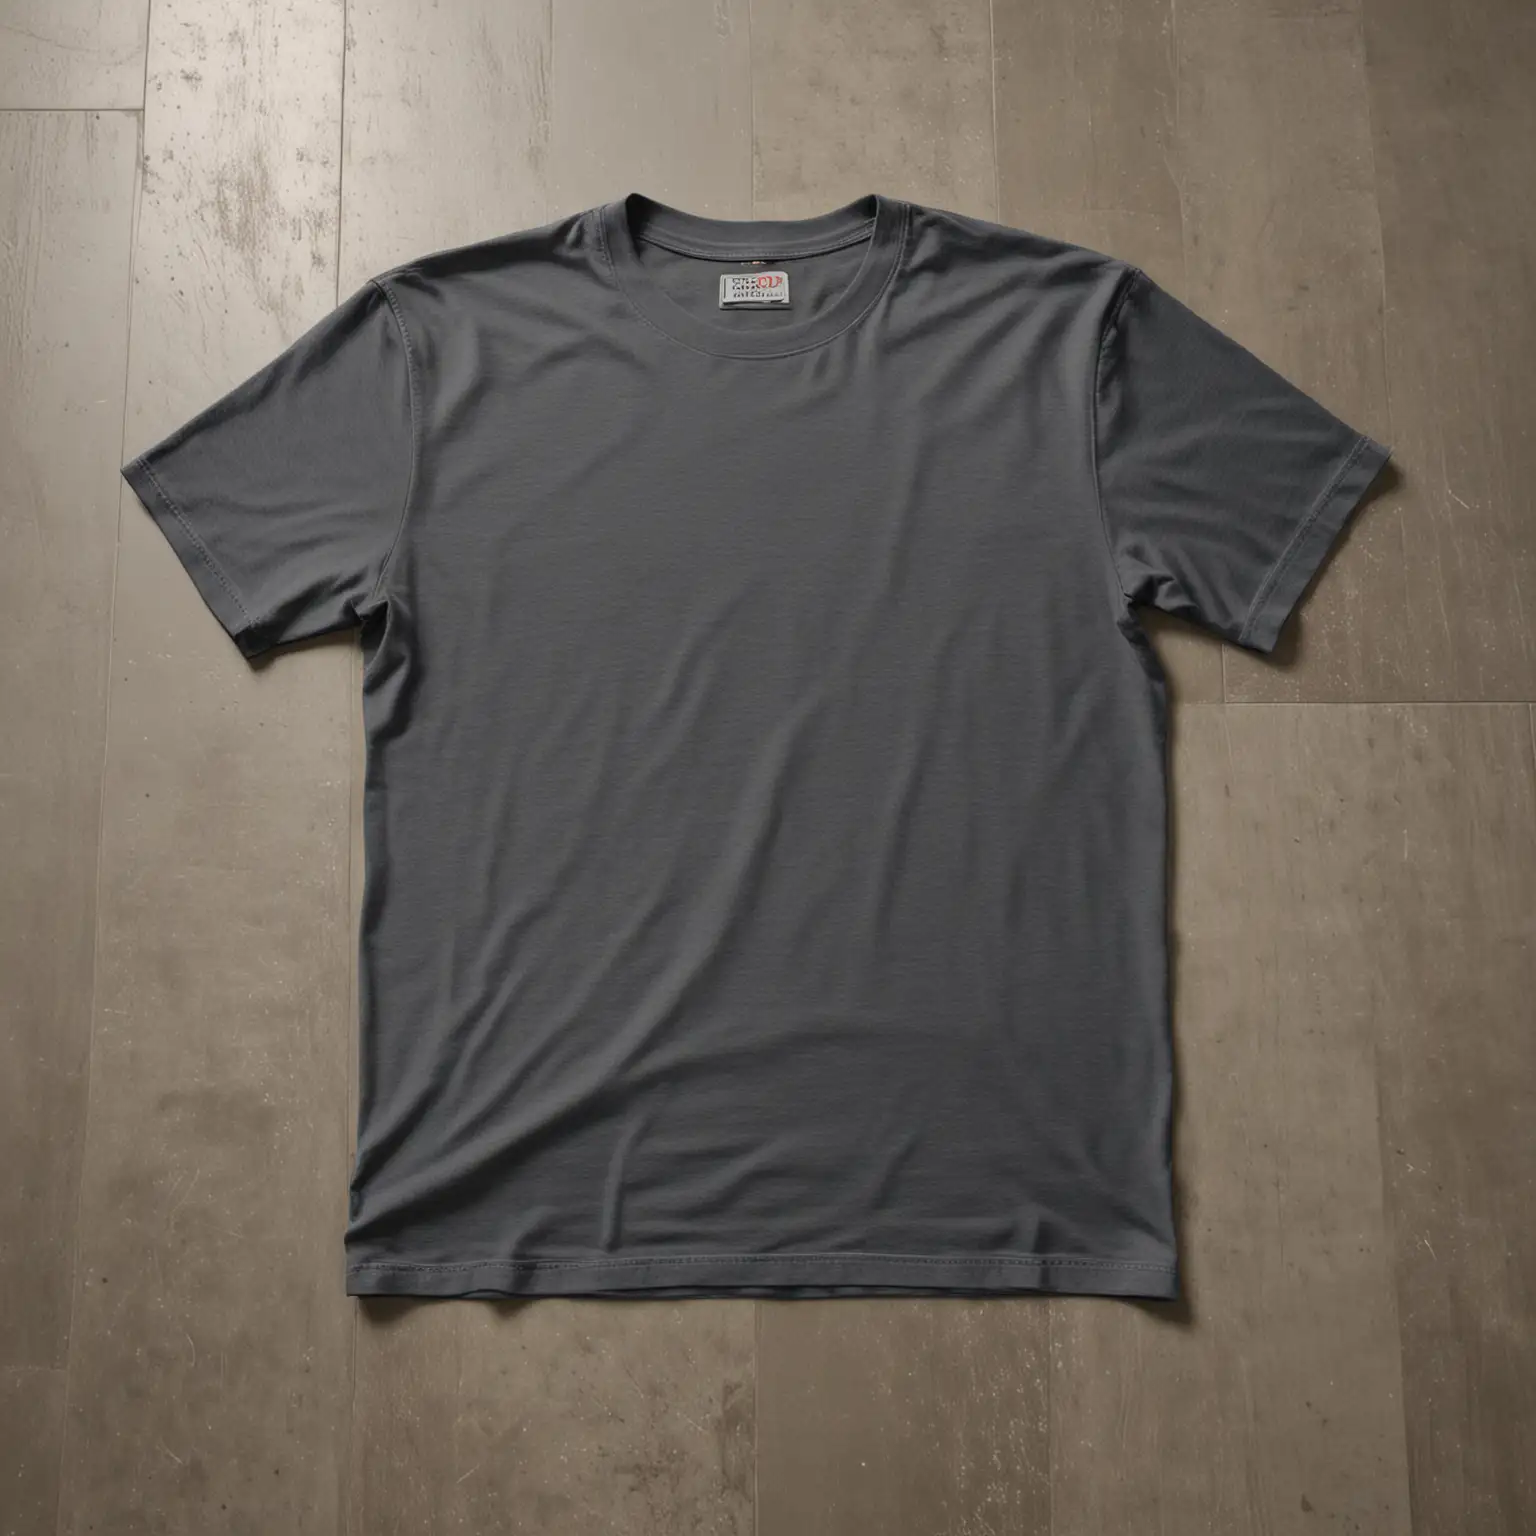 Hyper Realistic Cotton Tshirt Flat Lay on Contrasting Background